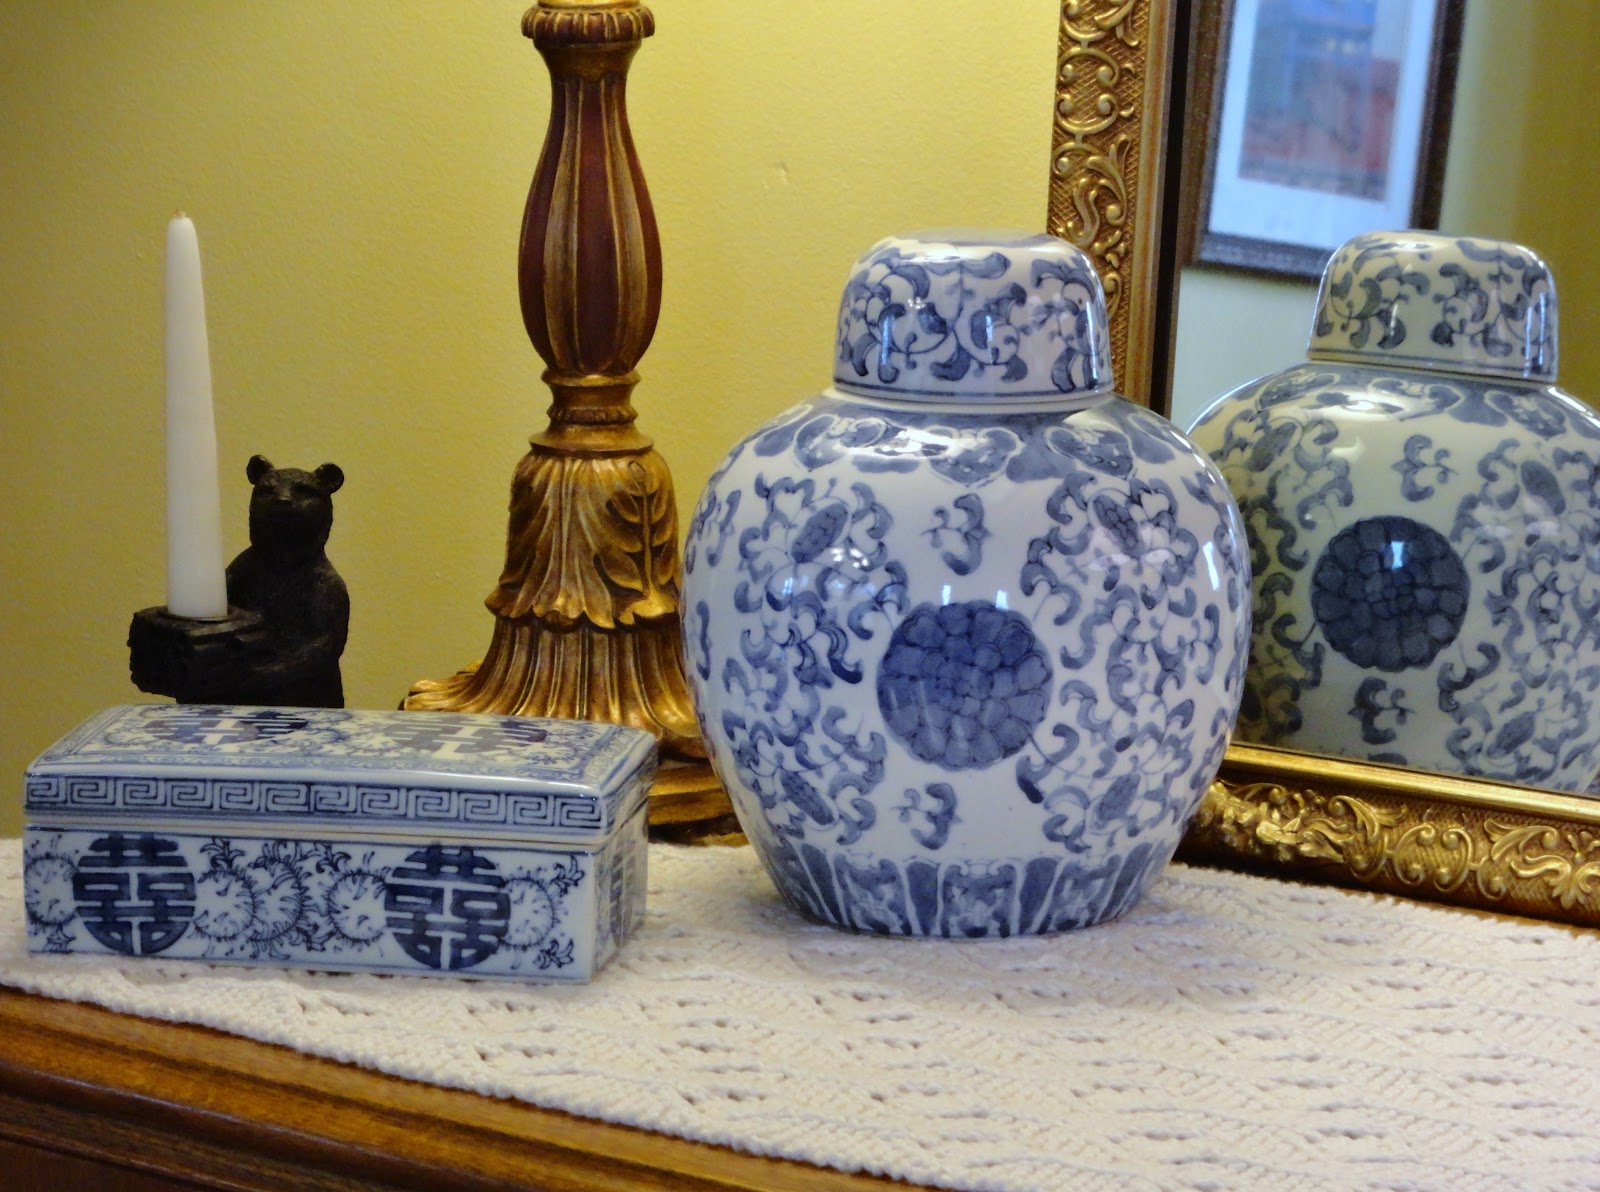 Days at Buttermilk Cottage: A Passion for Blue and White